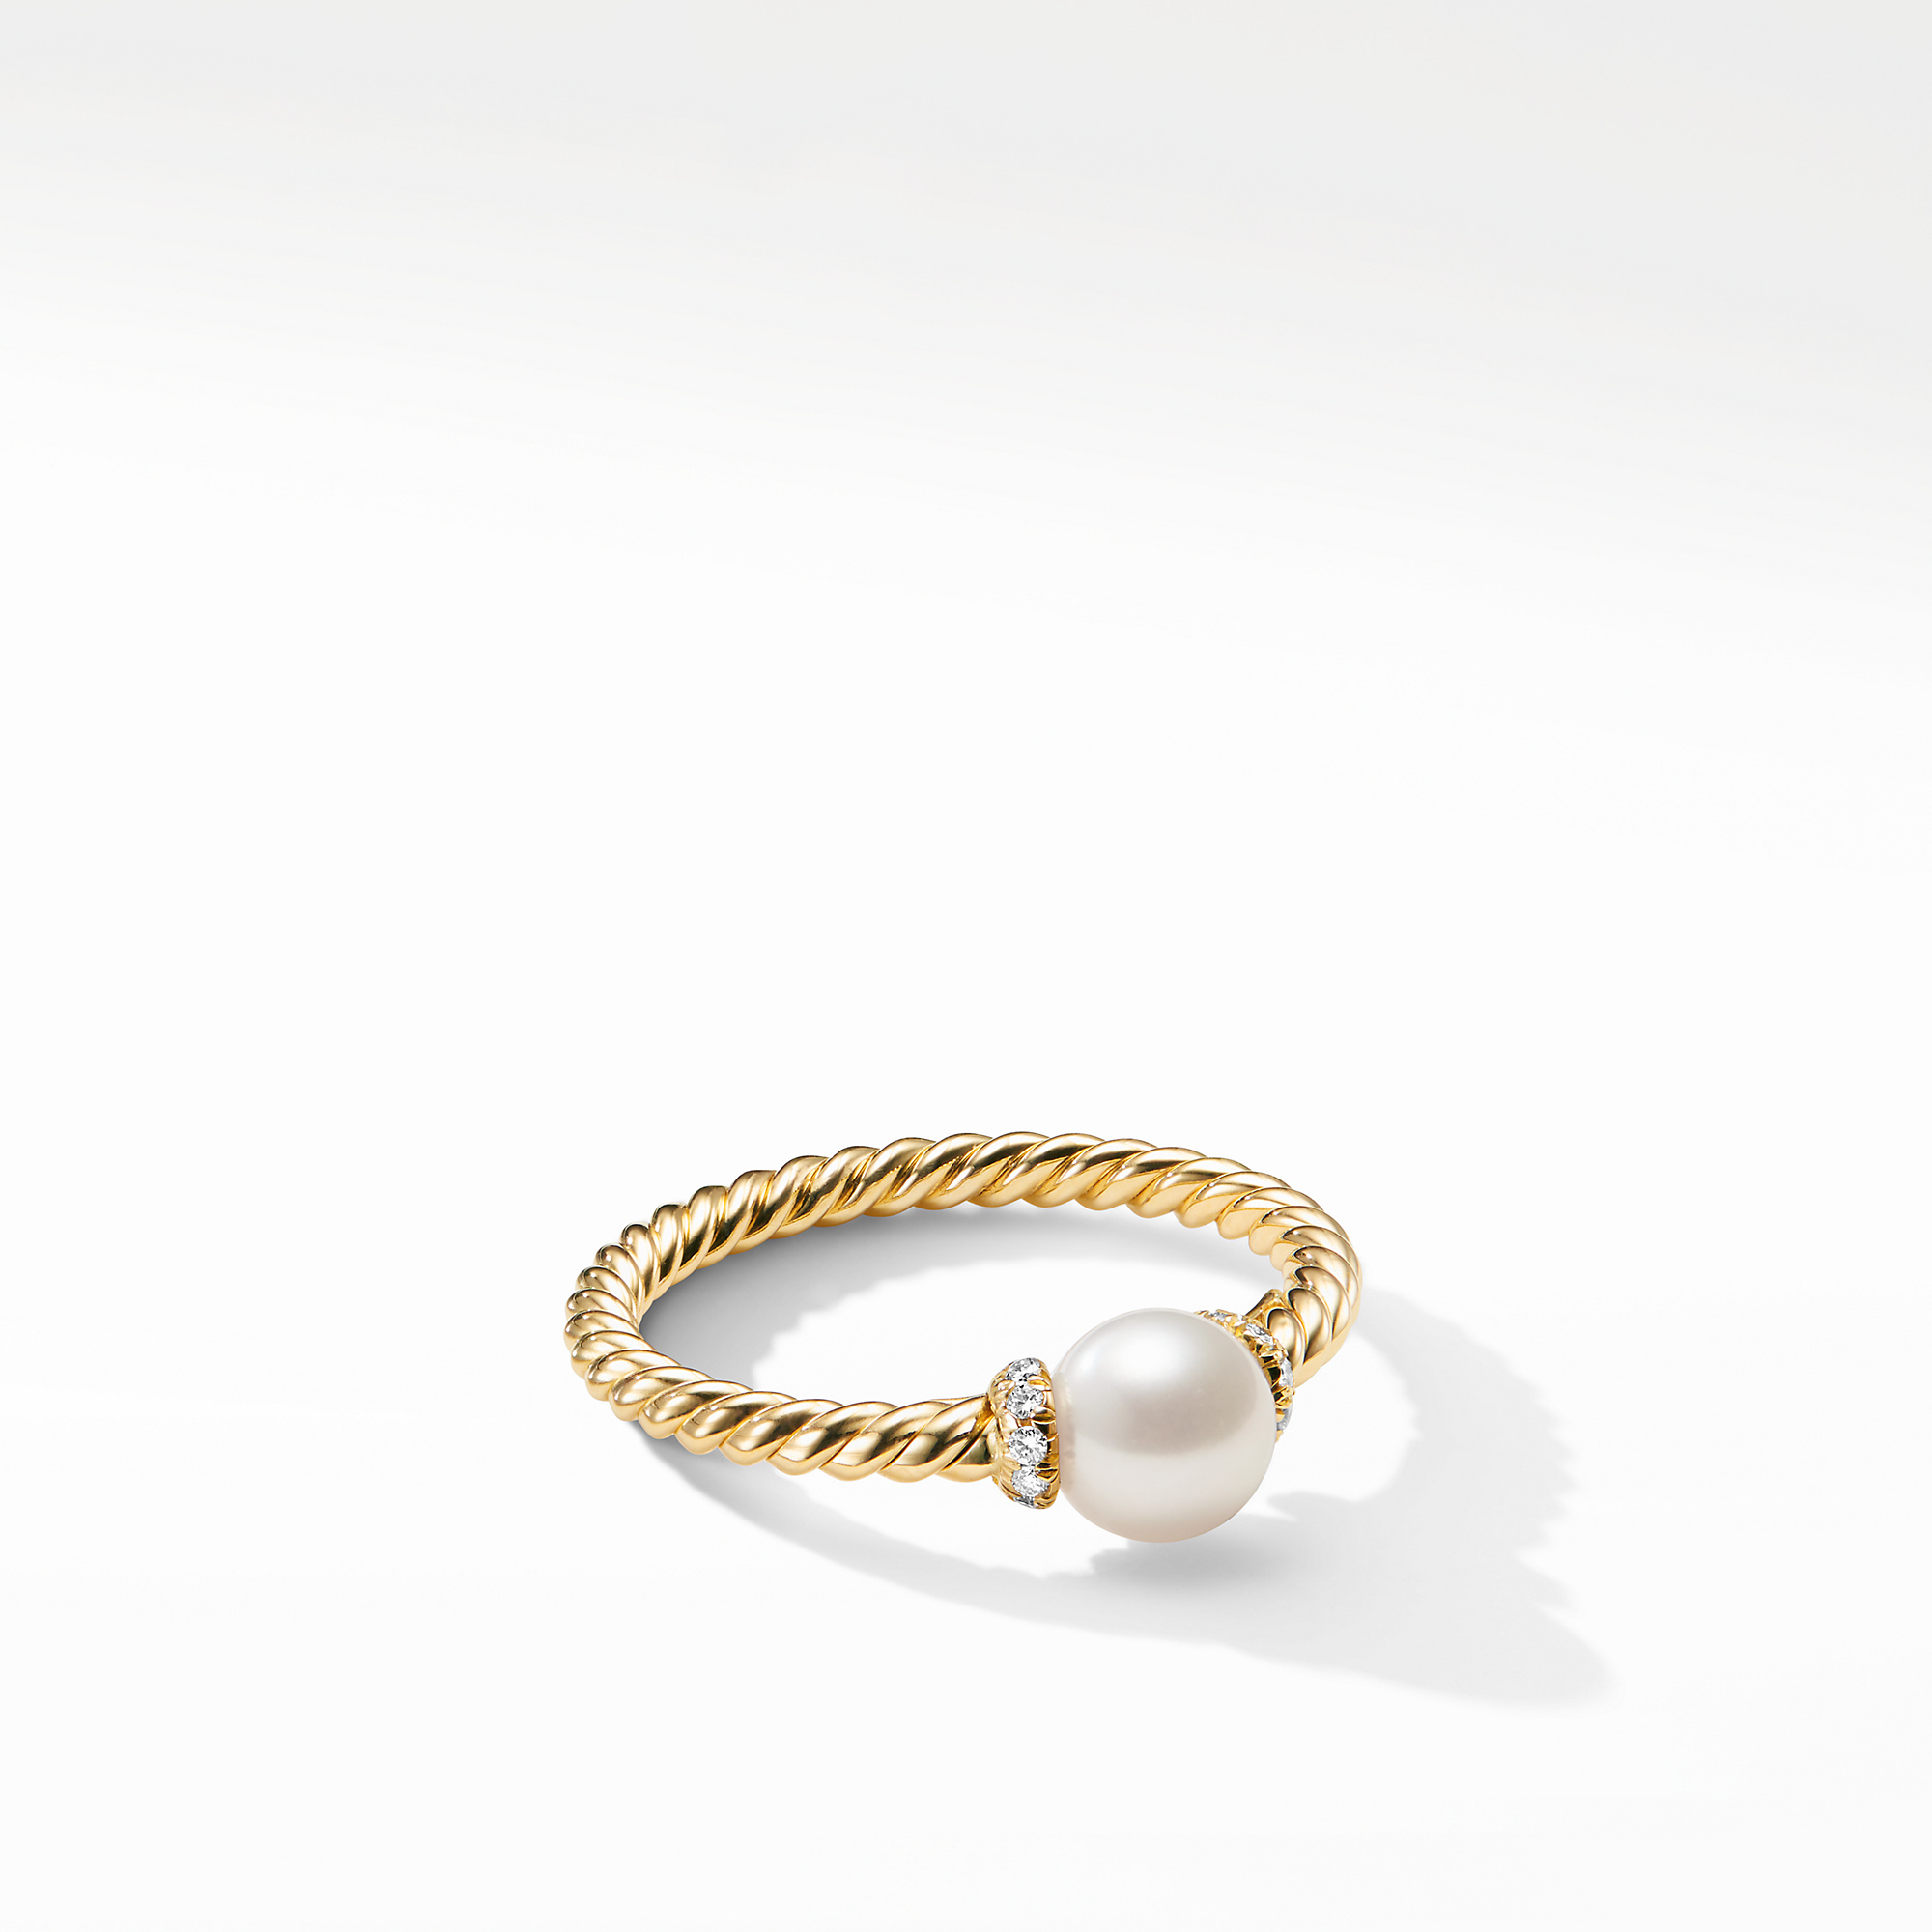 Petite Solari Station Ring in 18K Yellow Gold with Pearl and Pave Diamonds